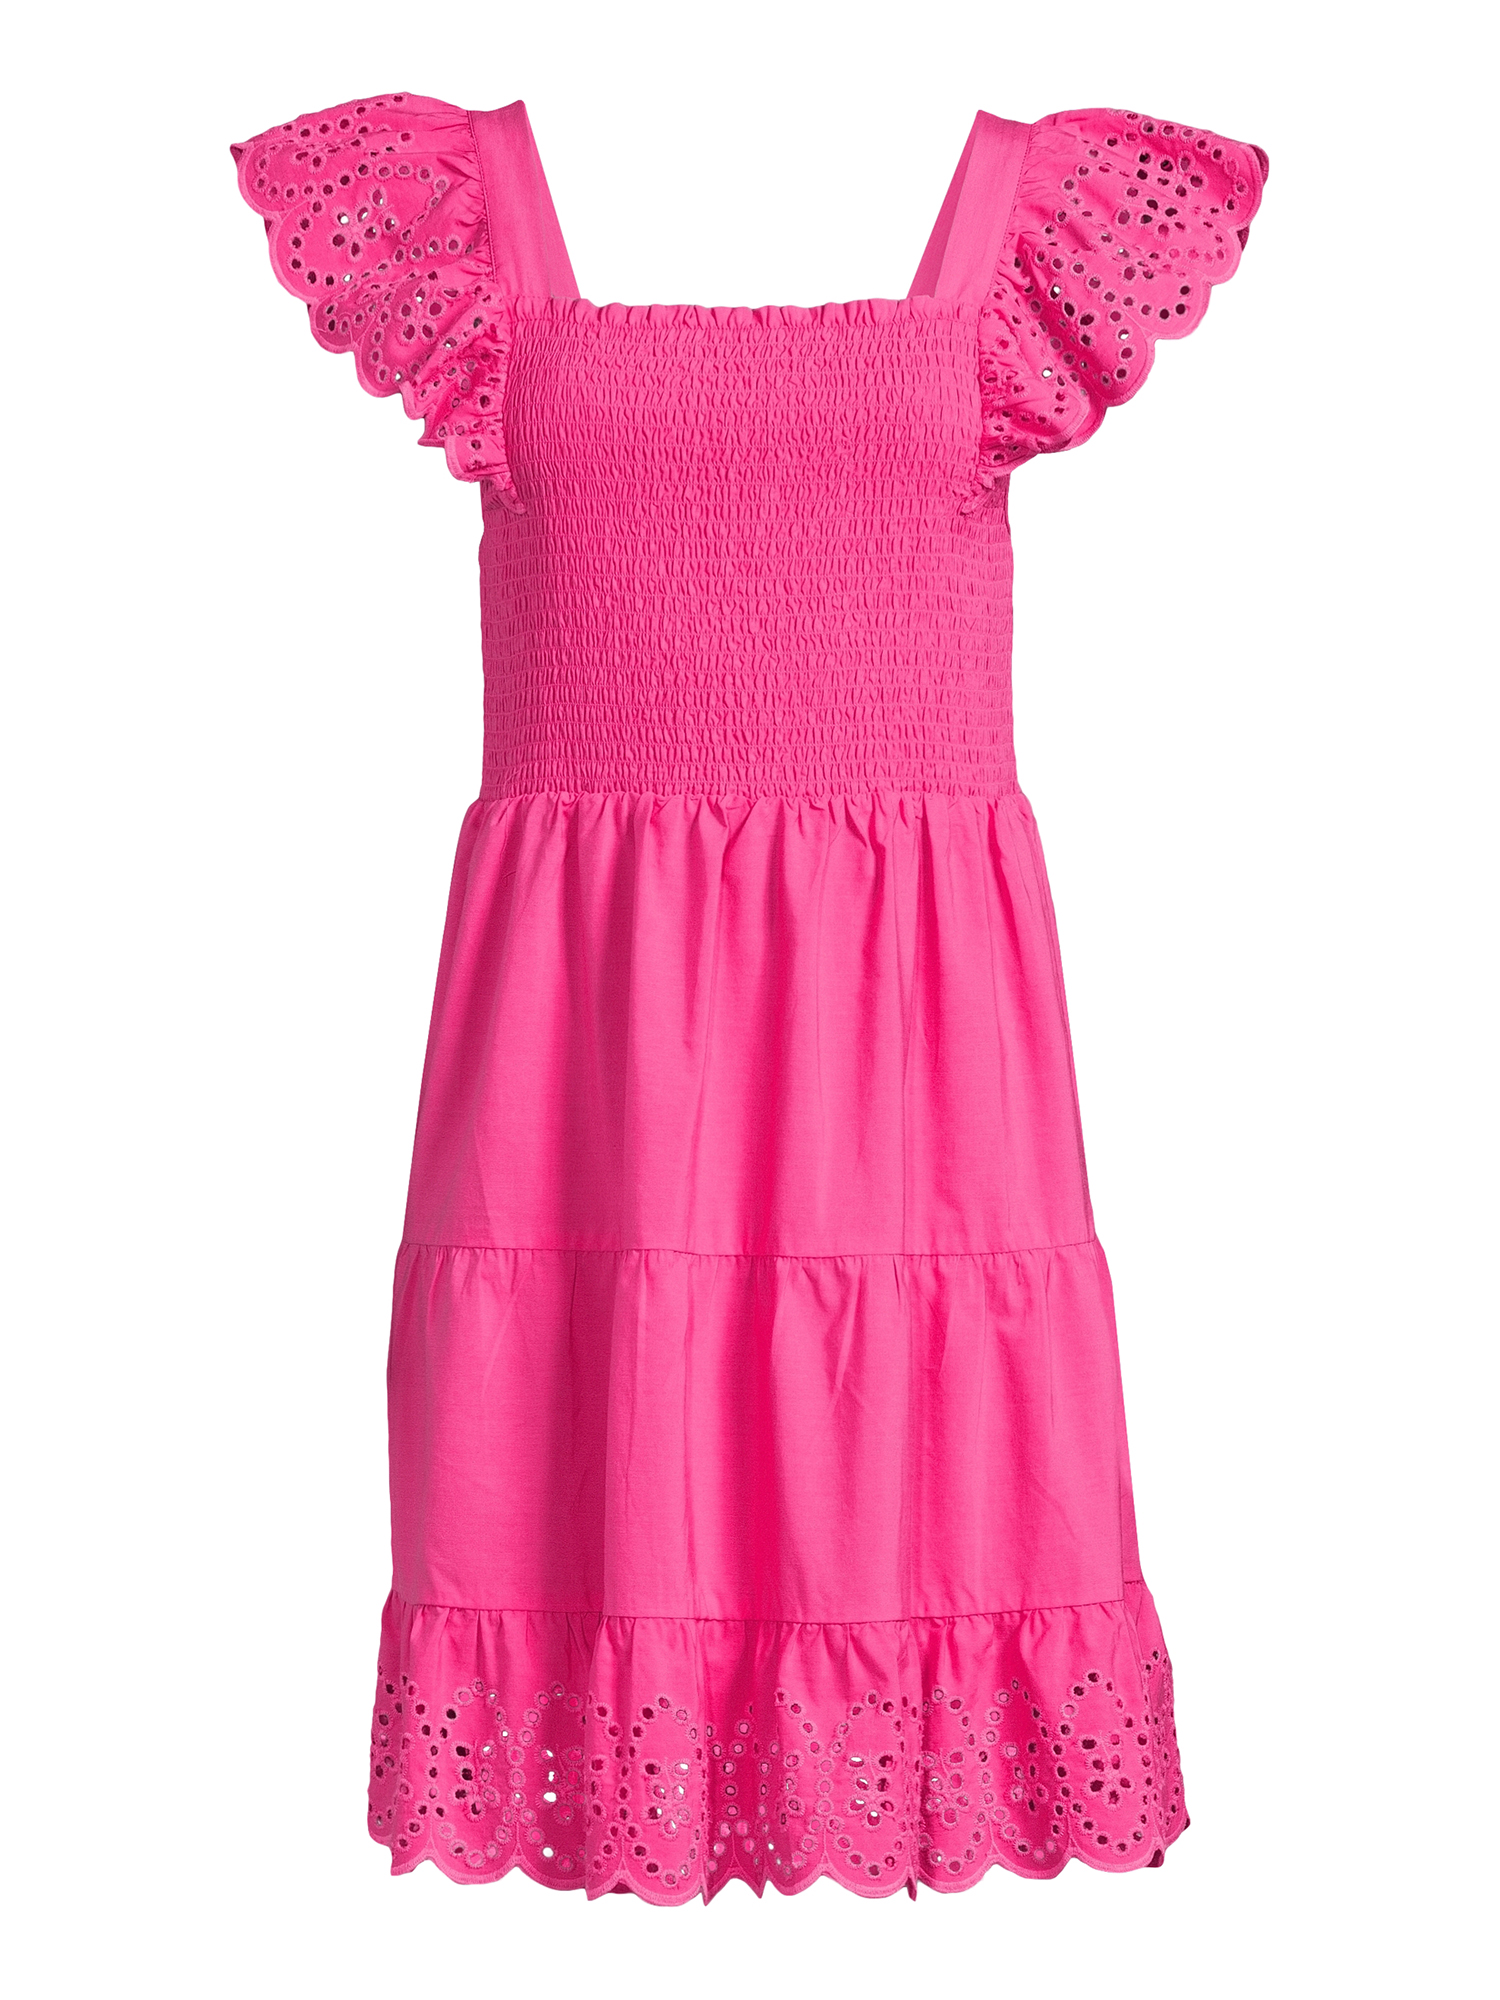 Time And Tru Women's Smocked Eyelet Dress - image 4 of 5